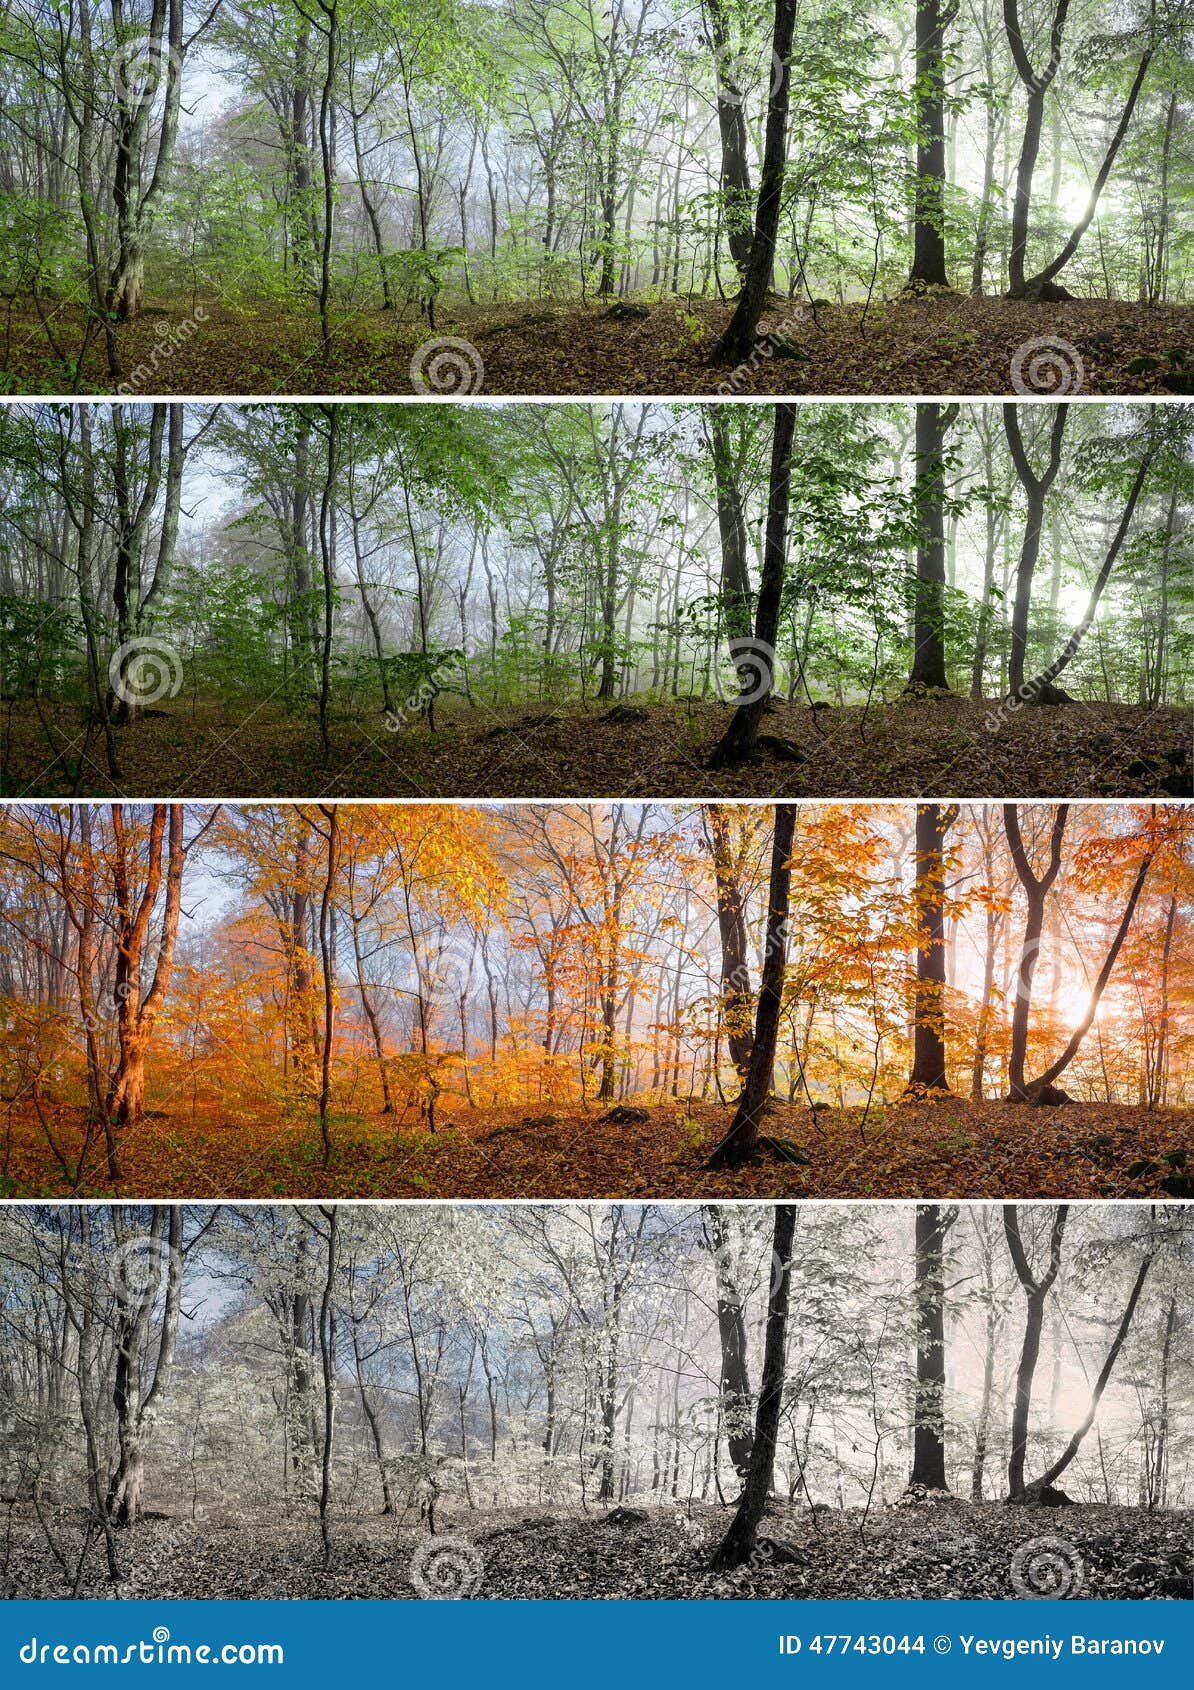 More similar stock images of ` Beautiful morning scene in the forest 